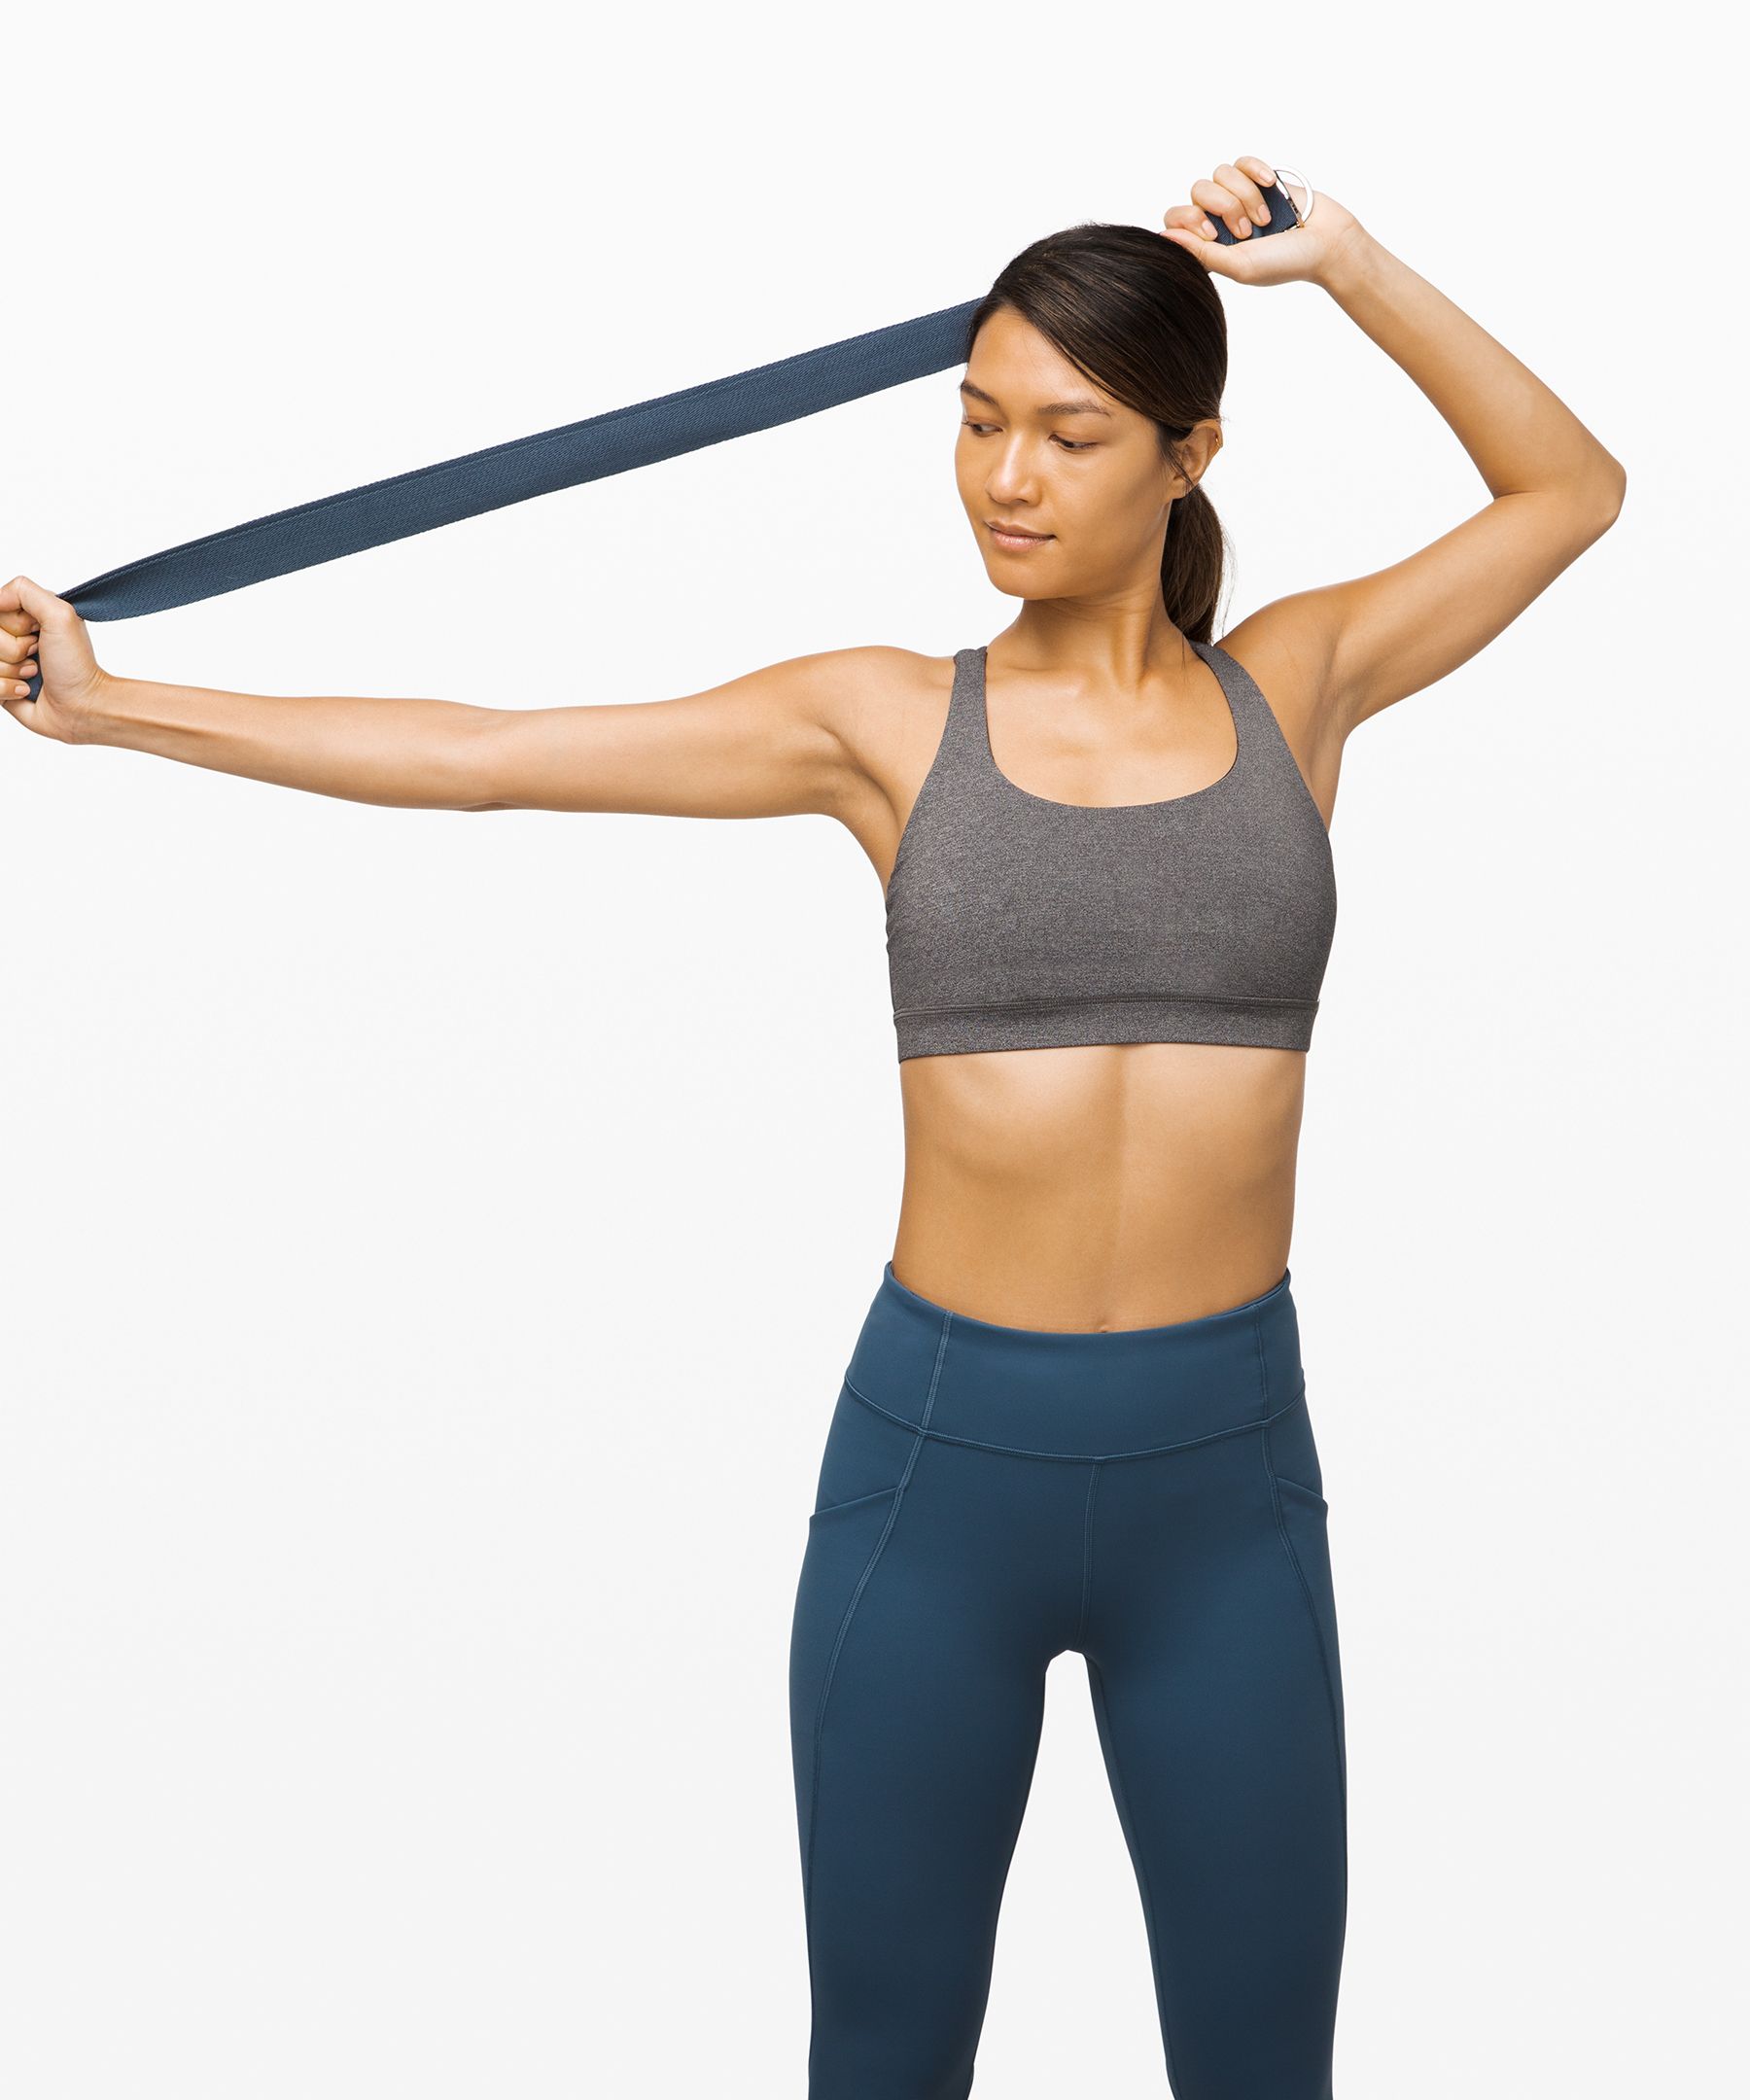 Lululemon No Limits Stretching Strap In Code Blue